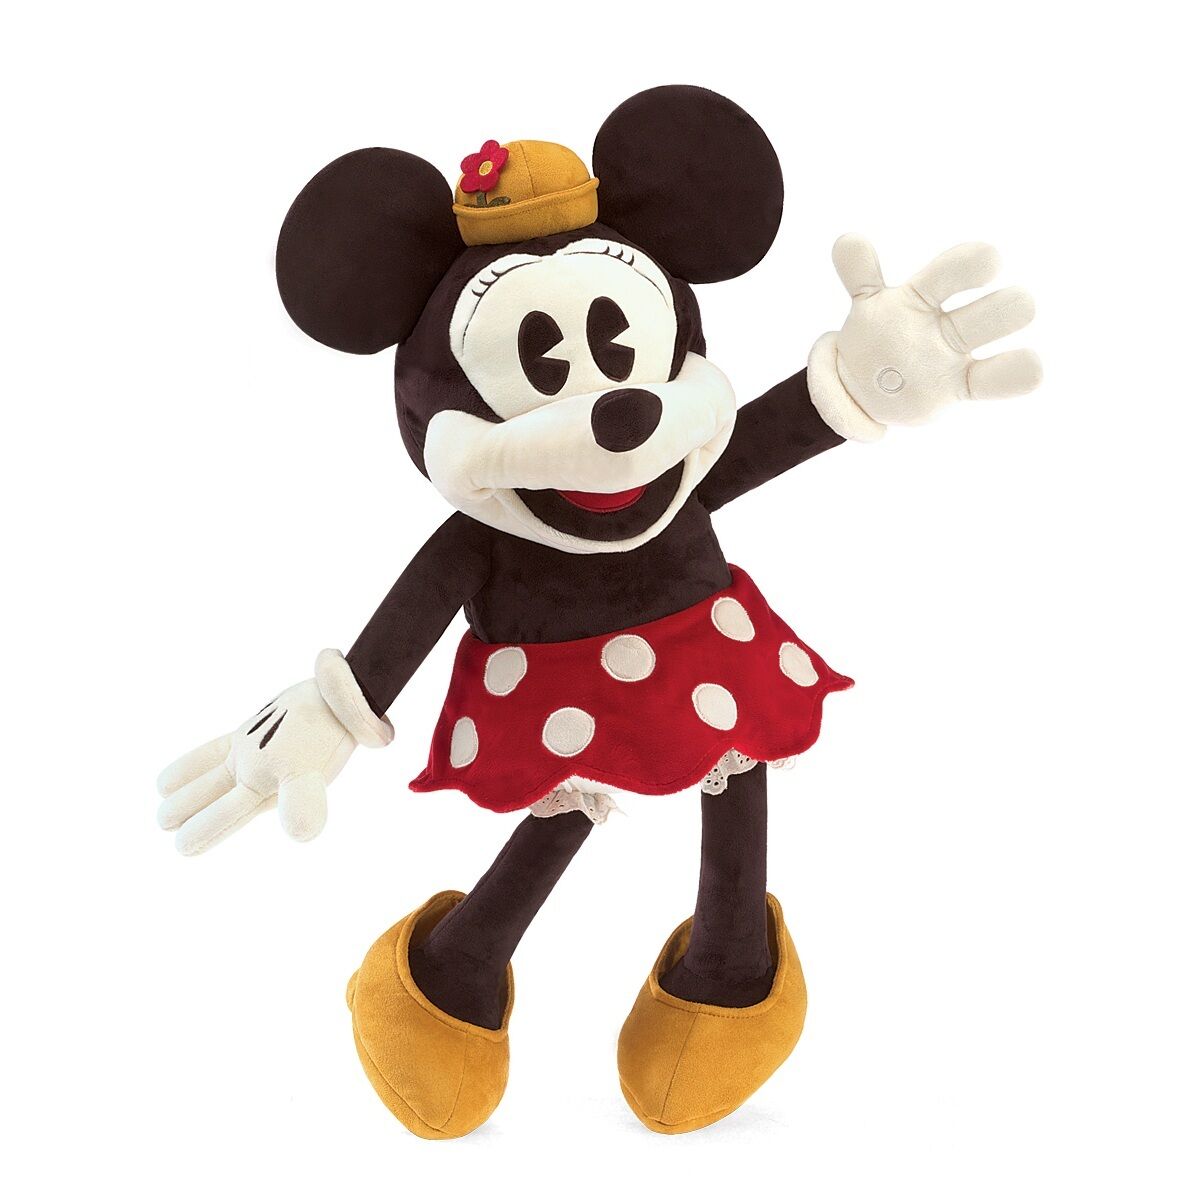 Disney Minnie Mouse Puppet with Movable Arms & Mouth, Folkmanis MPN 5009